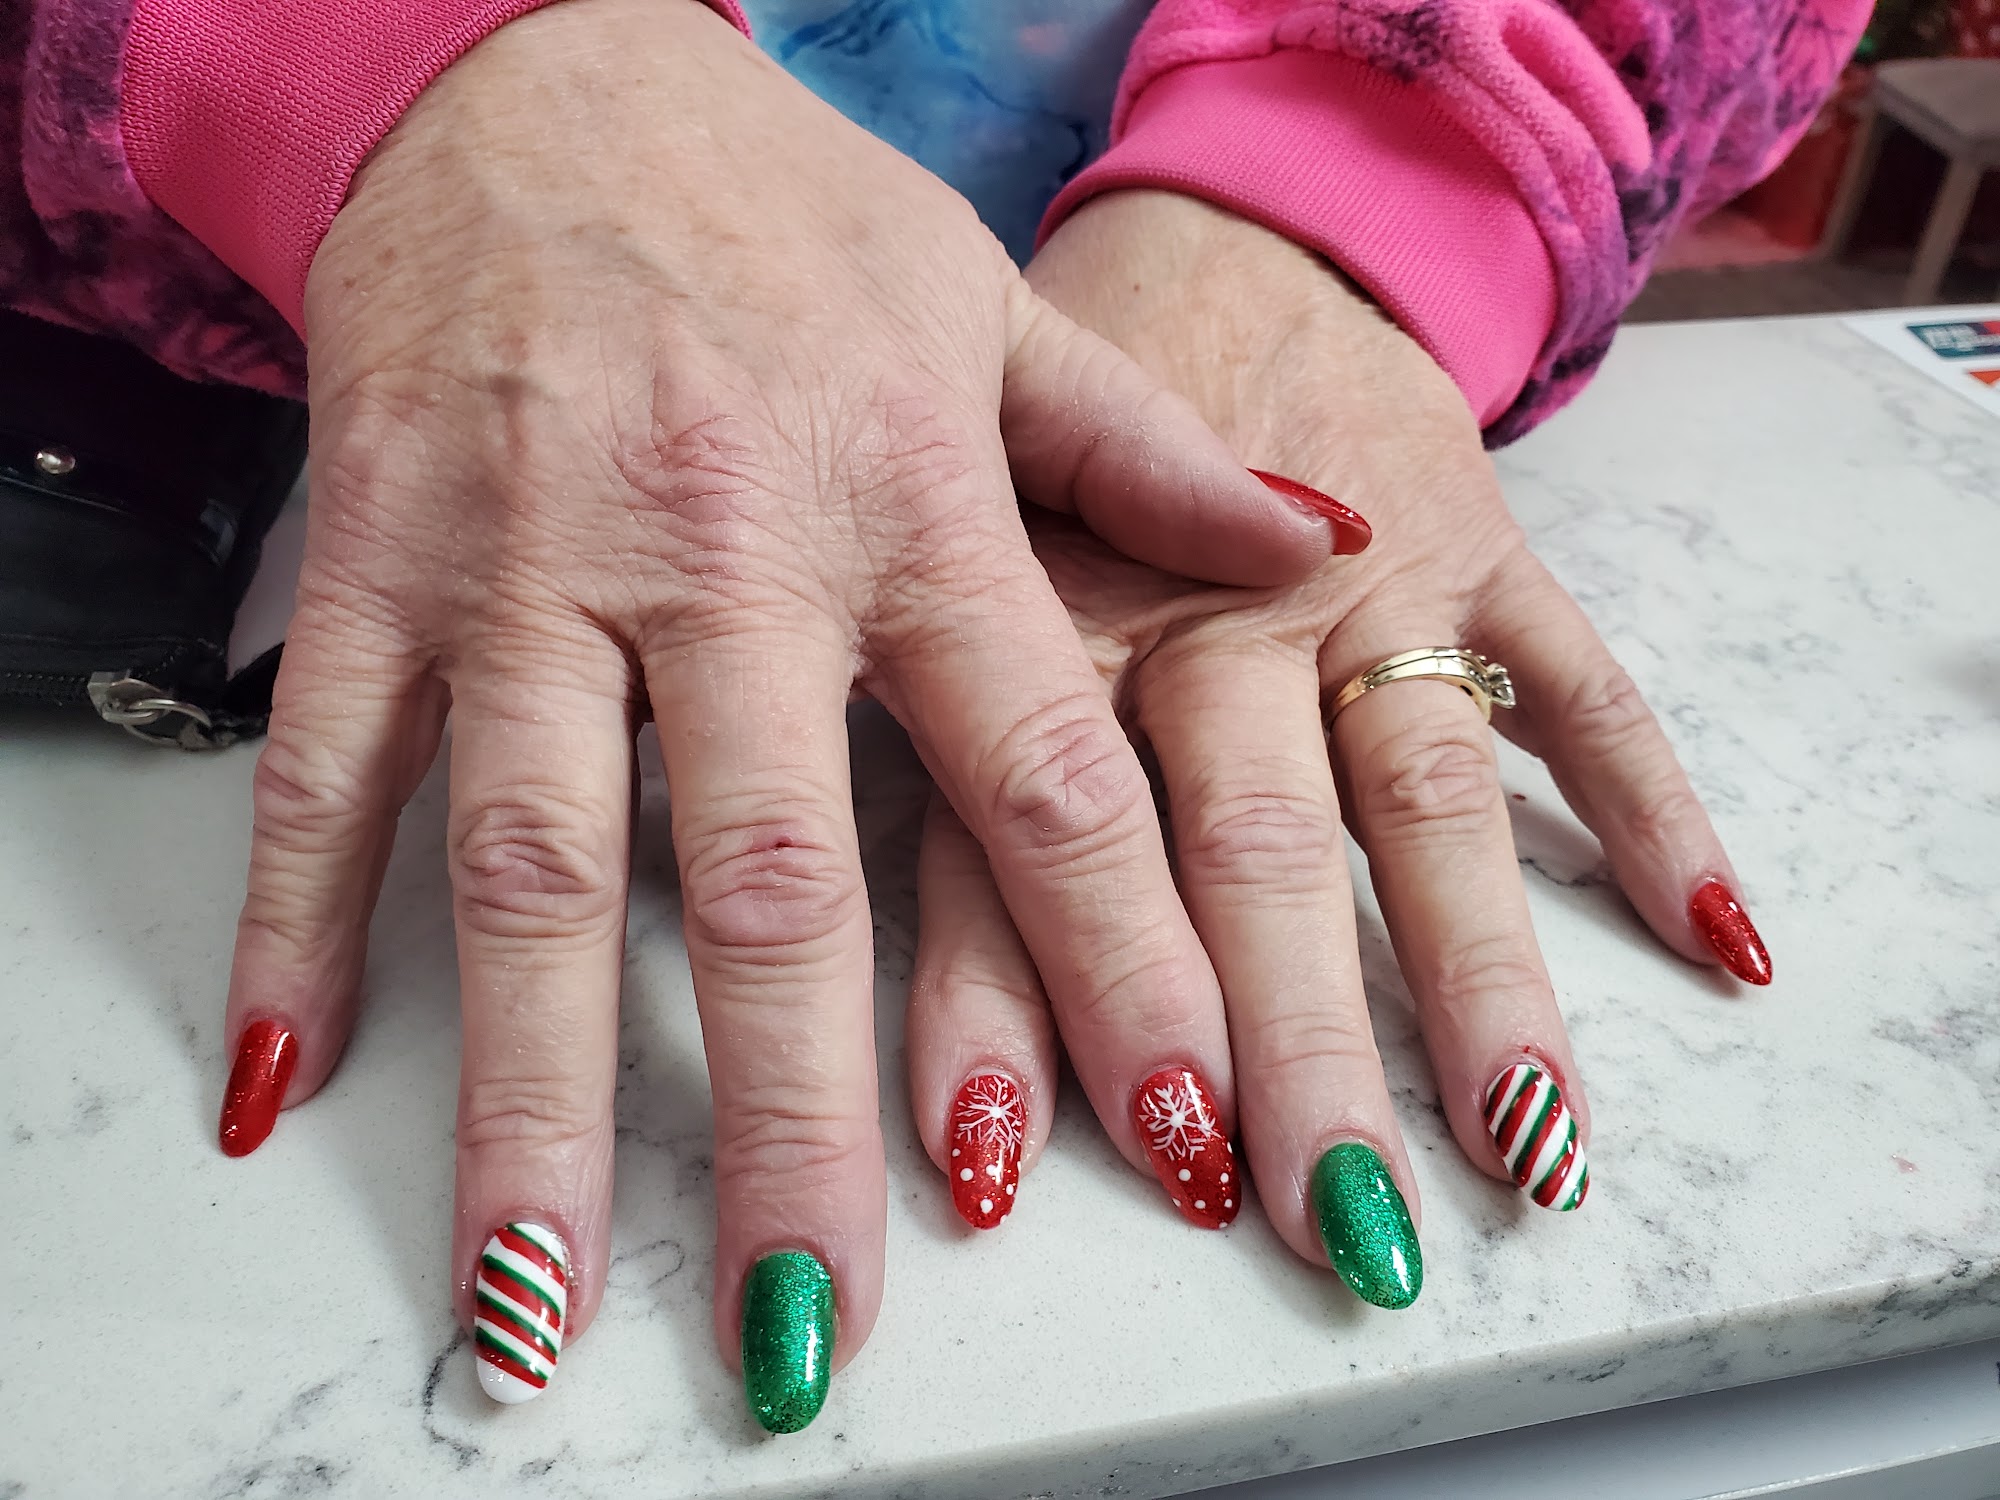 Mimi's Nails and Spa 510n N Superior Ave, Tomah Wisconsin 54660